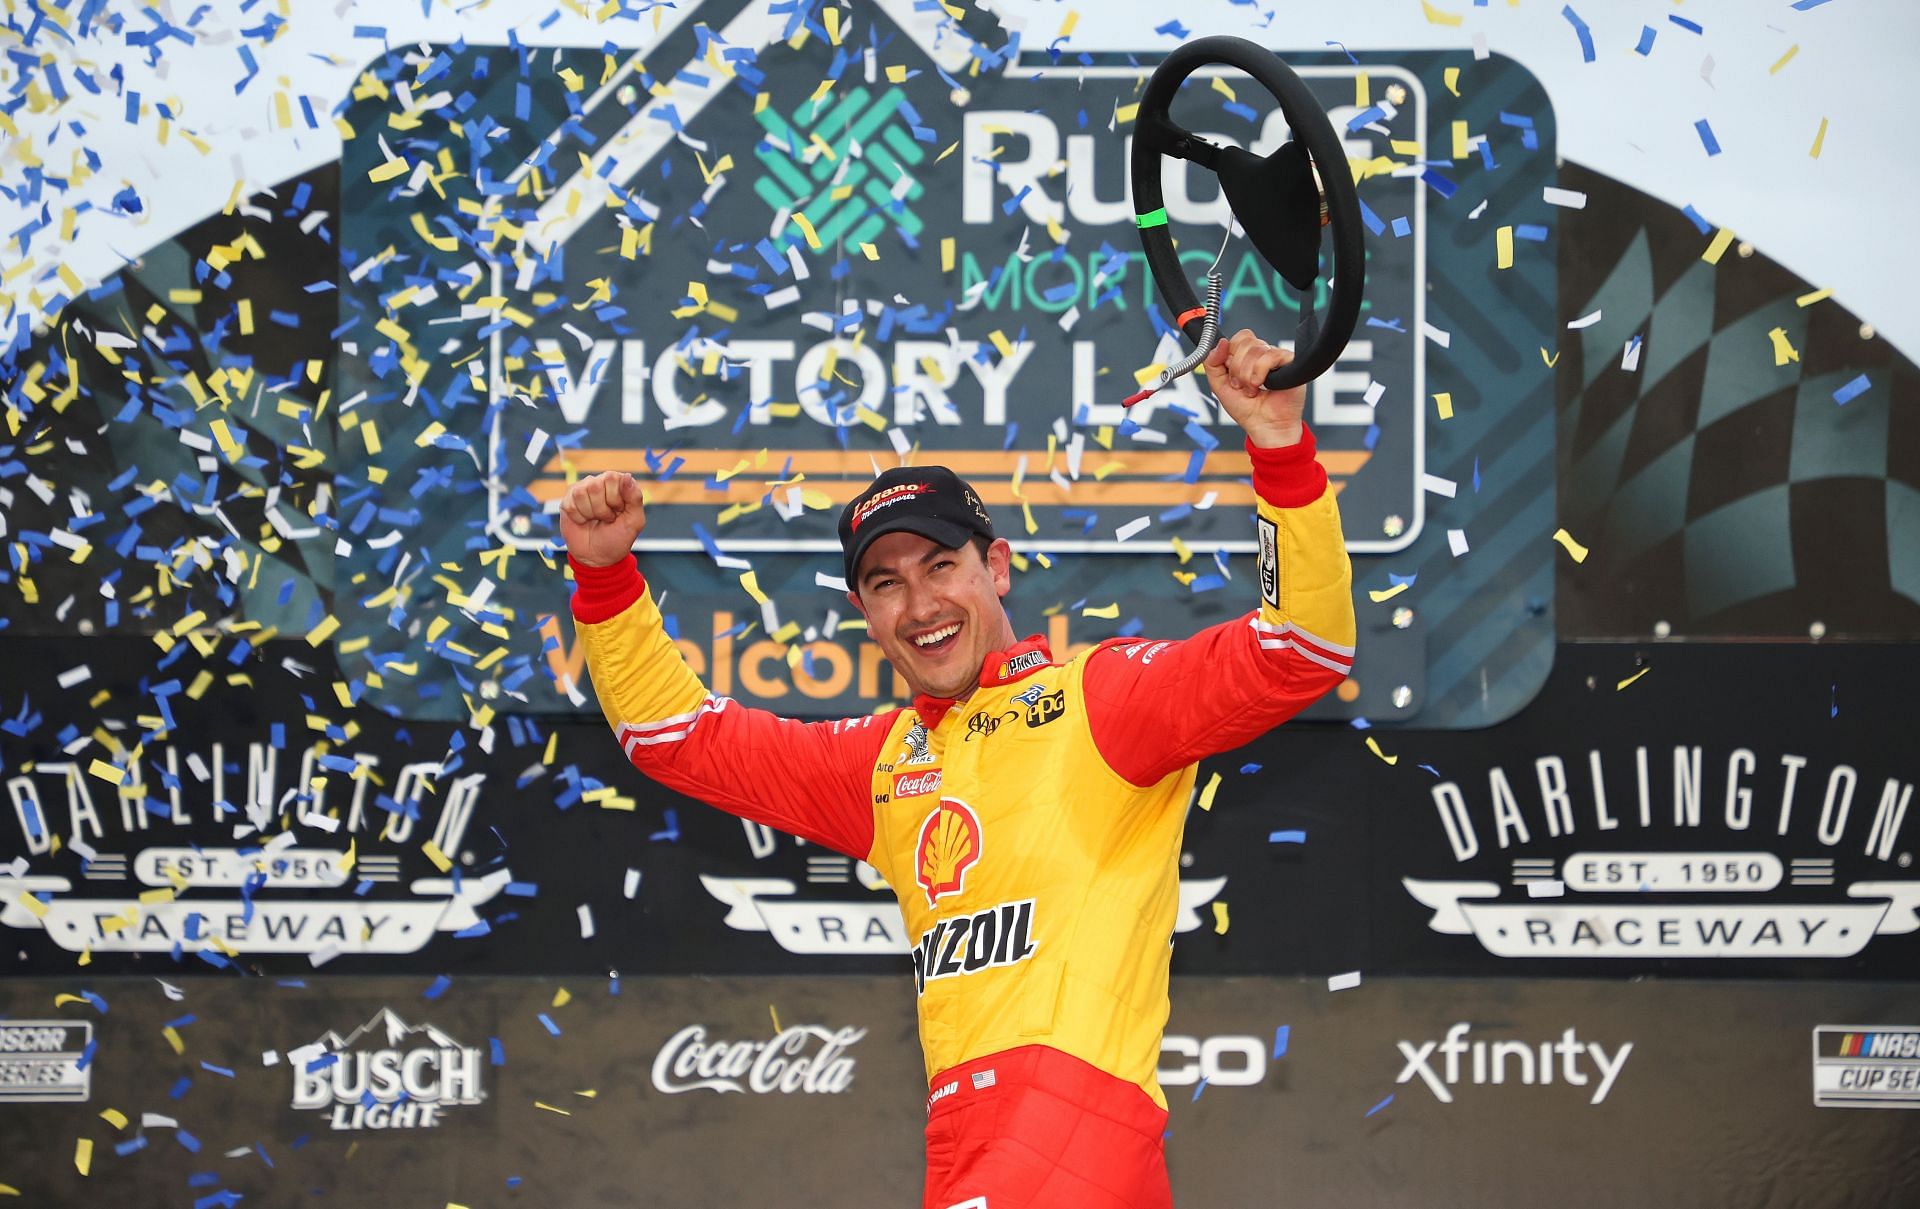 Joey Logano celebrates in the Ruoff Mortgage victory lane after winning the NASCAR Cup Series Goodyear 400 at Darlington Raceway (Photo by James Gilbert/Getty Images)